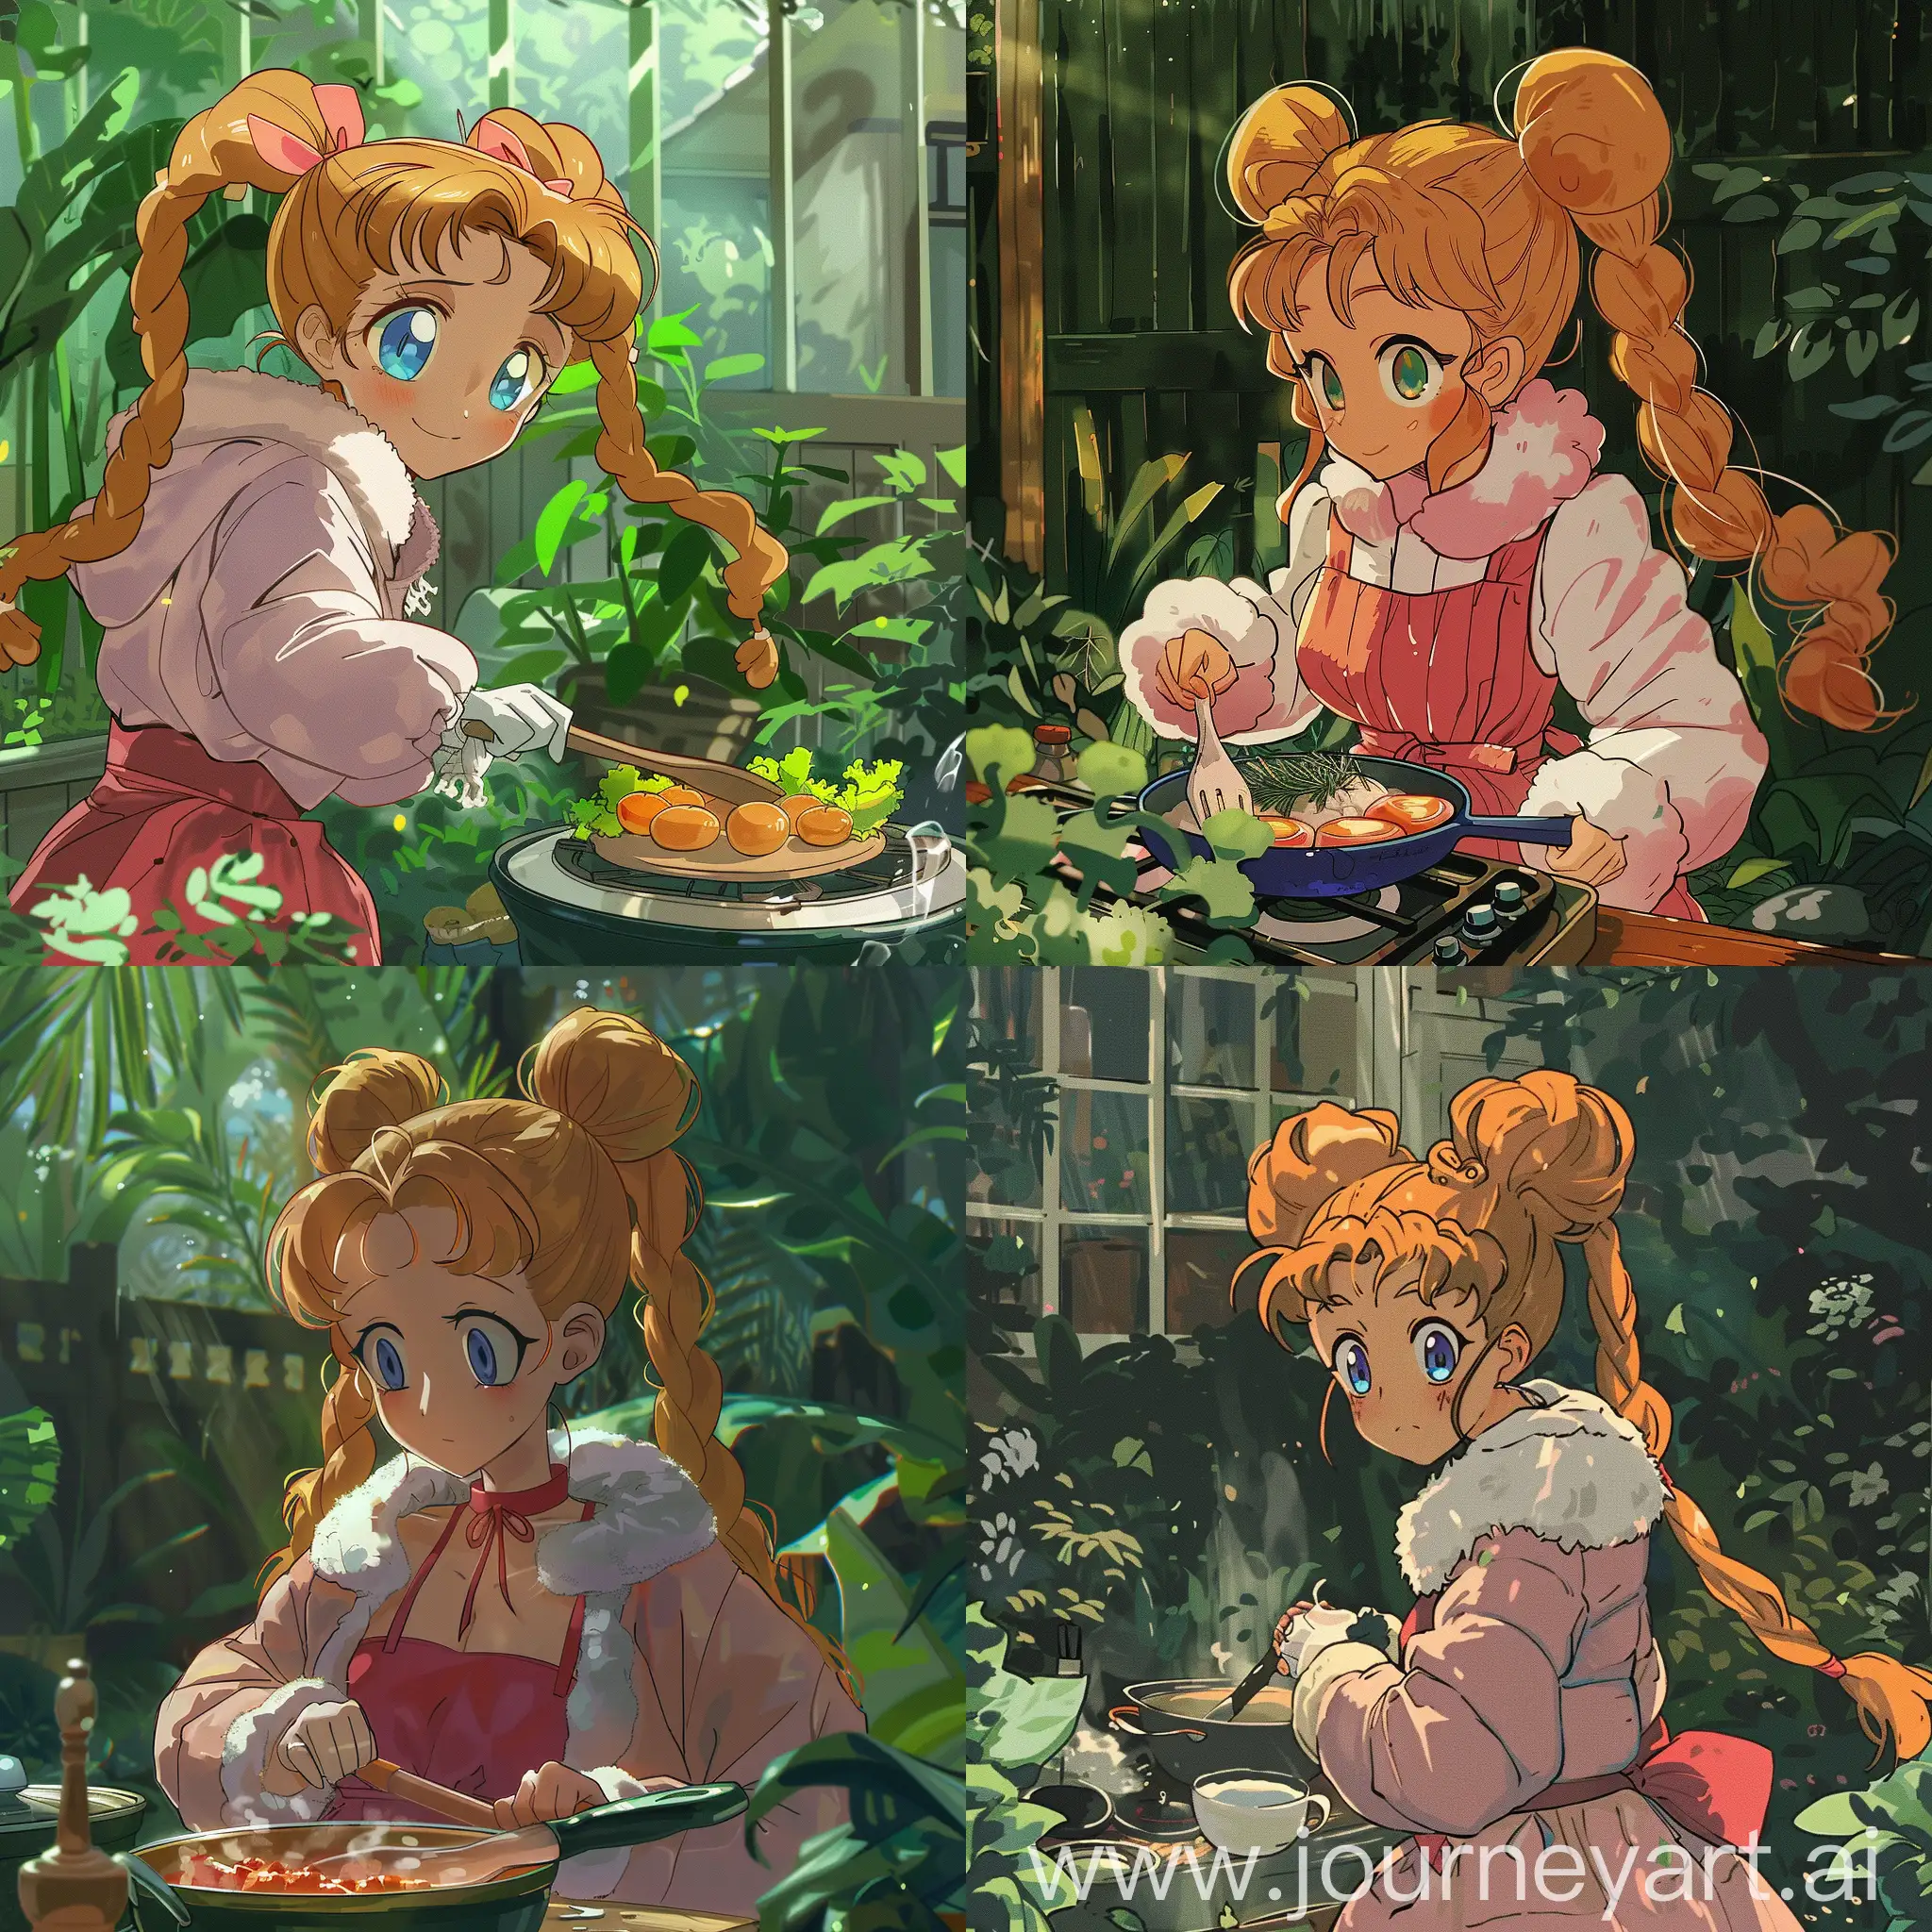 a woman wearing a red dress cooking in the garden, anime style --cref https://www.nofilleranime.com/wp-content/uploads/2021/07/Sailor-Moon-300x300.jpg?ezimgfmt=rs:300x300/rscb17/ng:webp/ngcb17 --cw 100